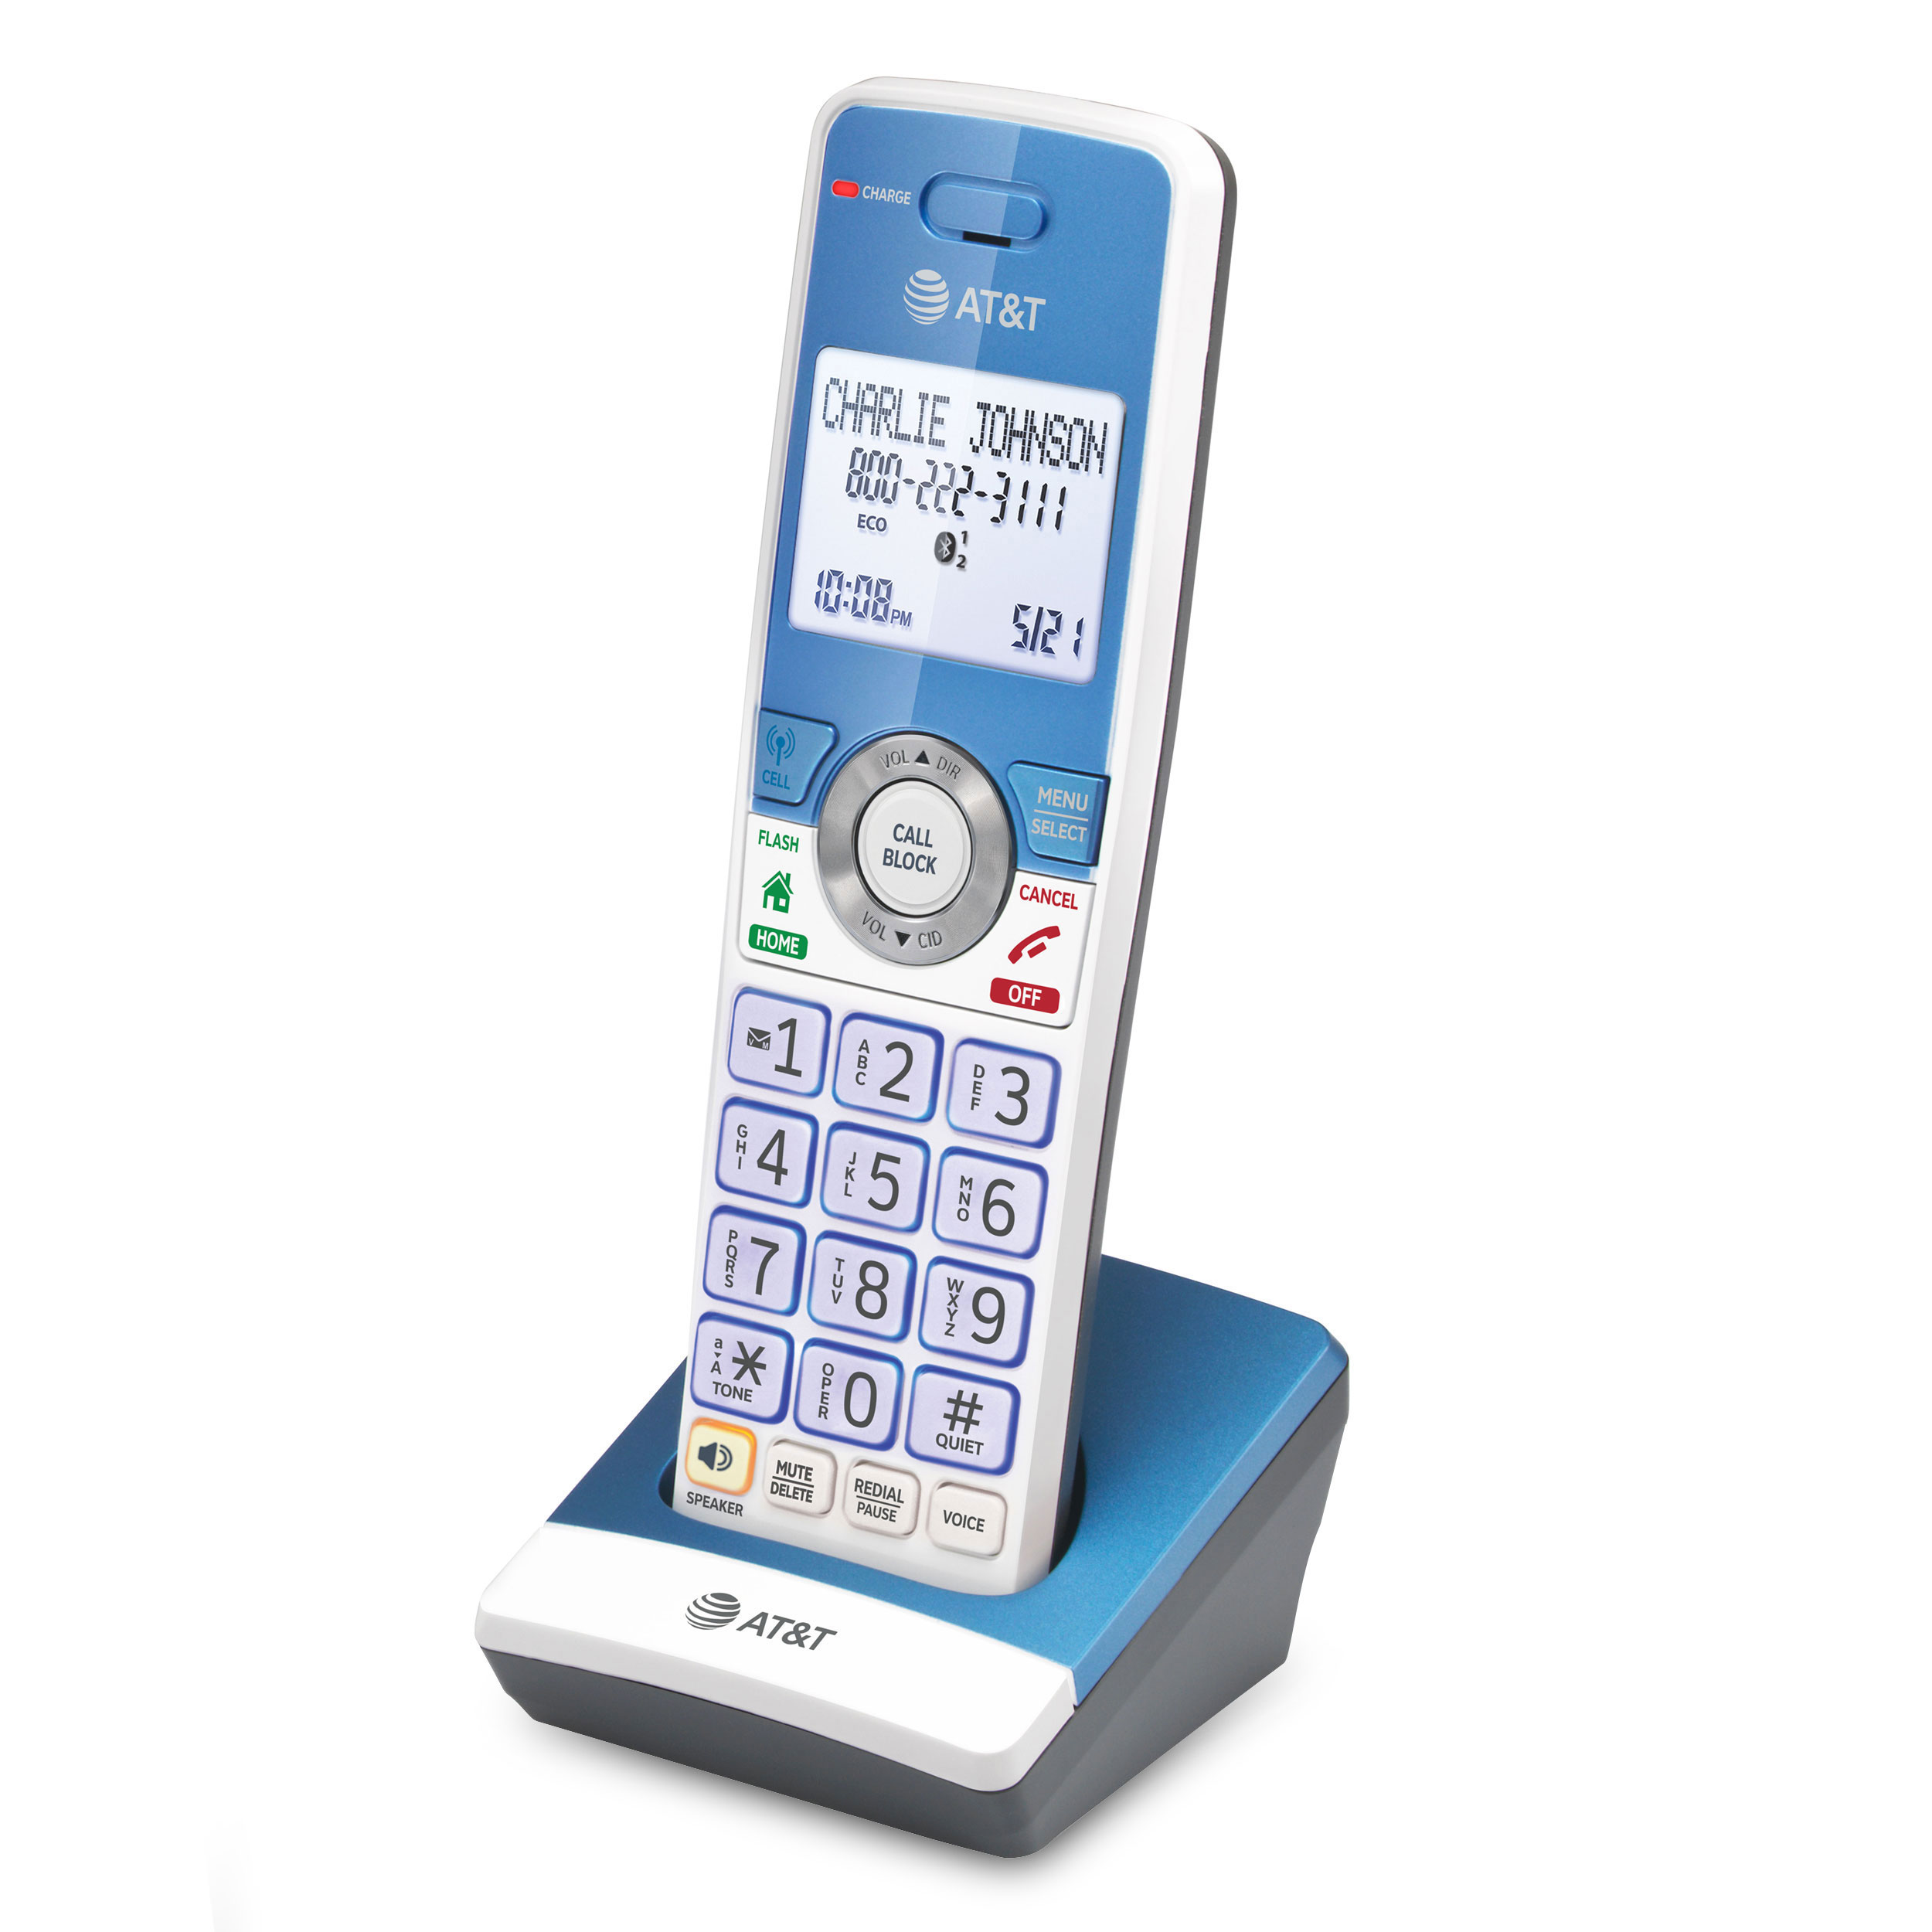 4-Handset Expandable Cordless Phone with Unsurpassed Range, Bluetooth Connect to Cell™, Smart Call Blocker and Answering System - view 9